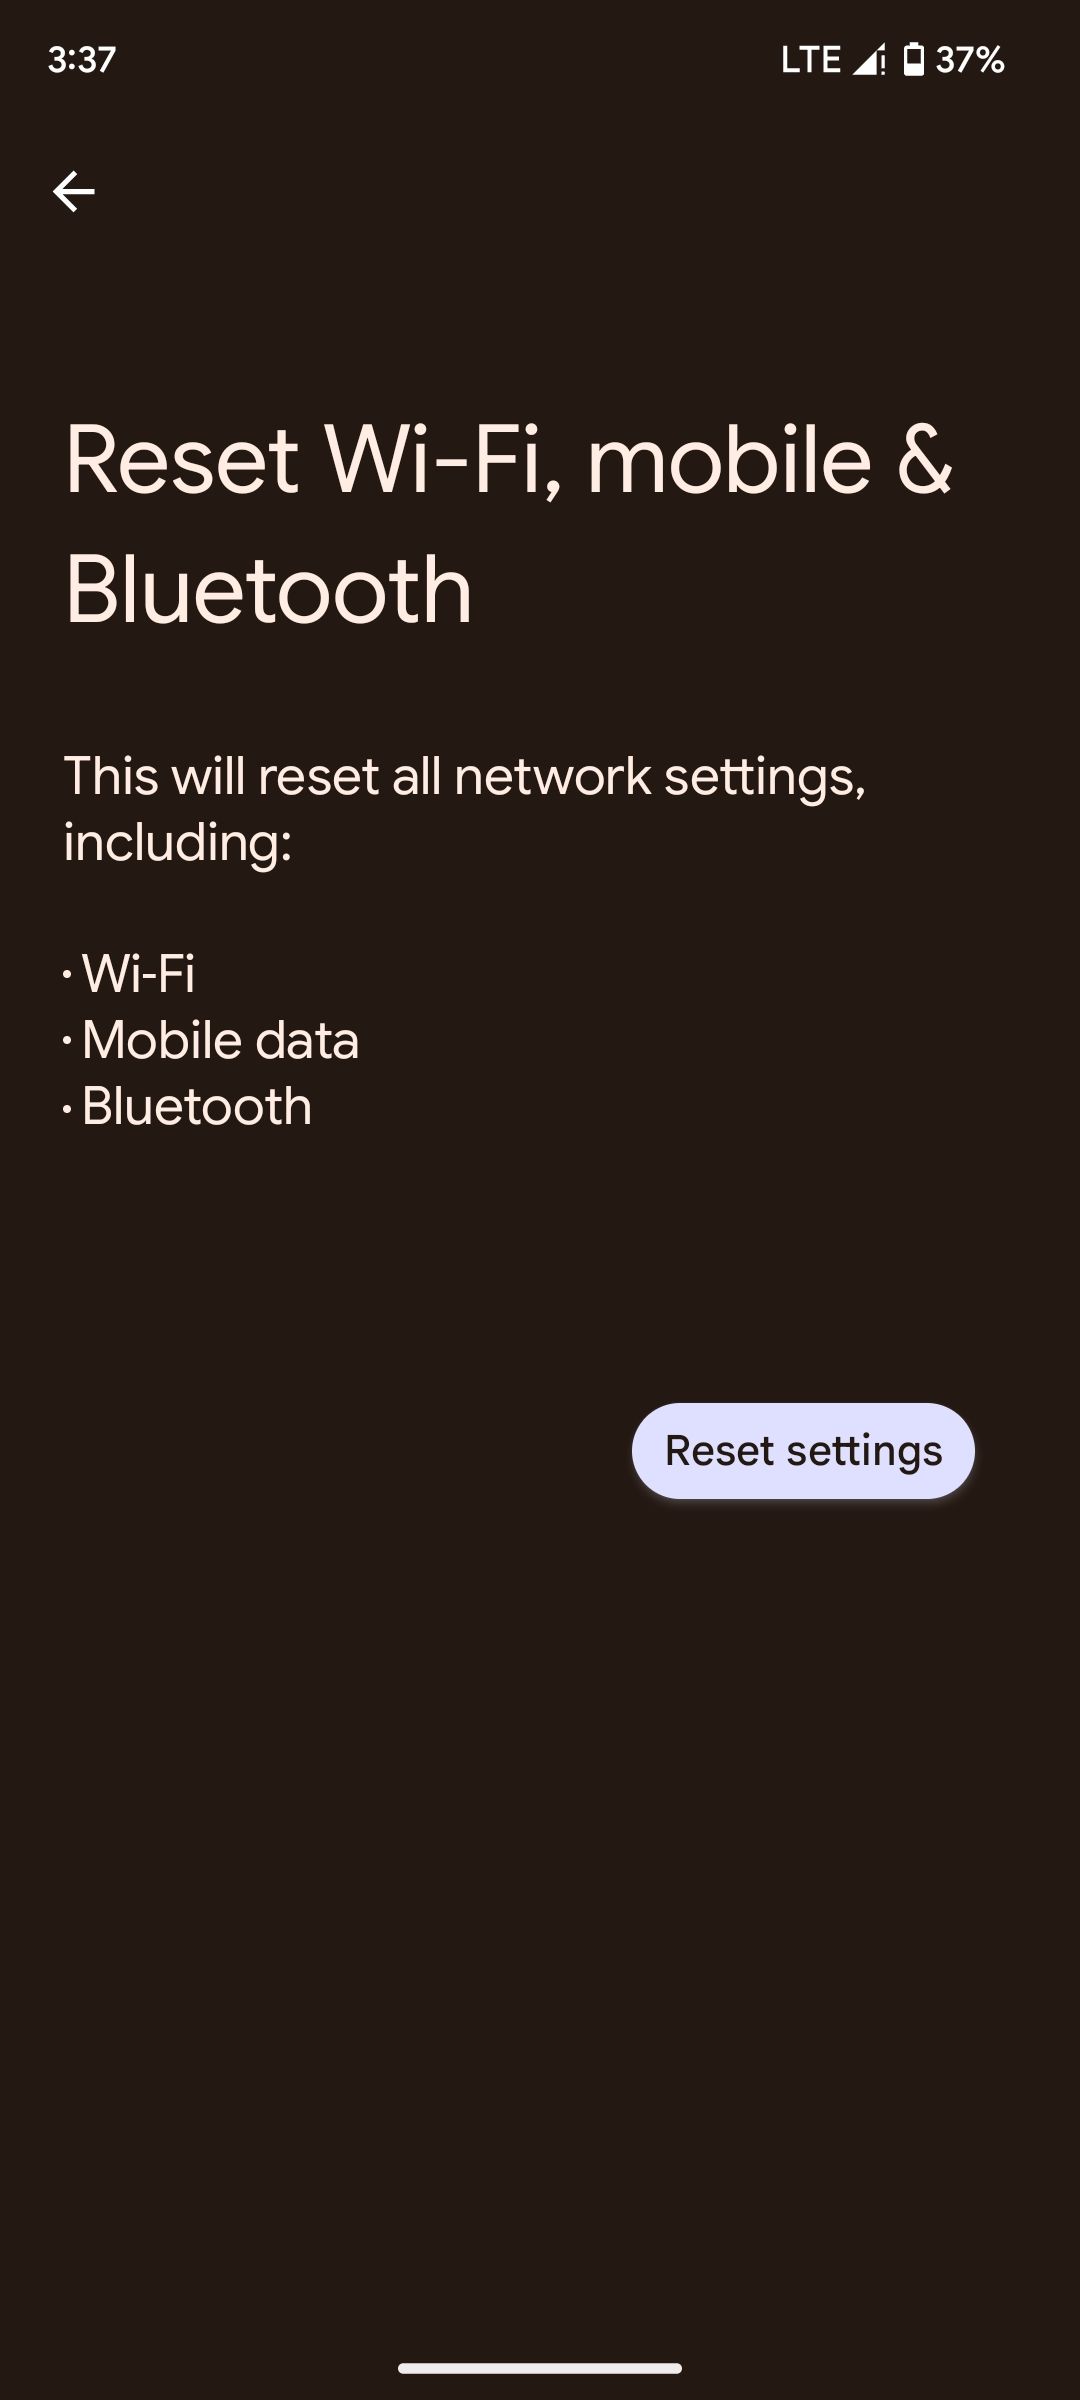 Resetting network settings on Android